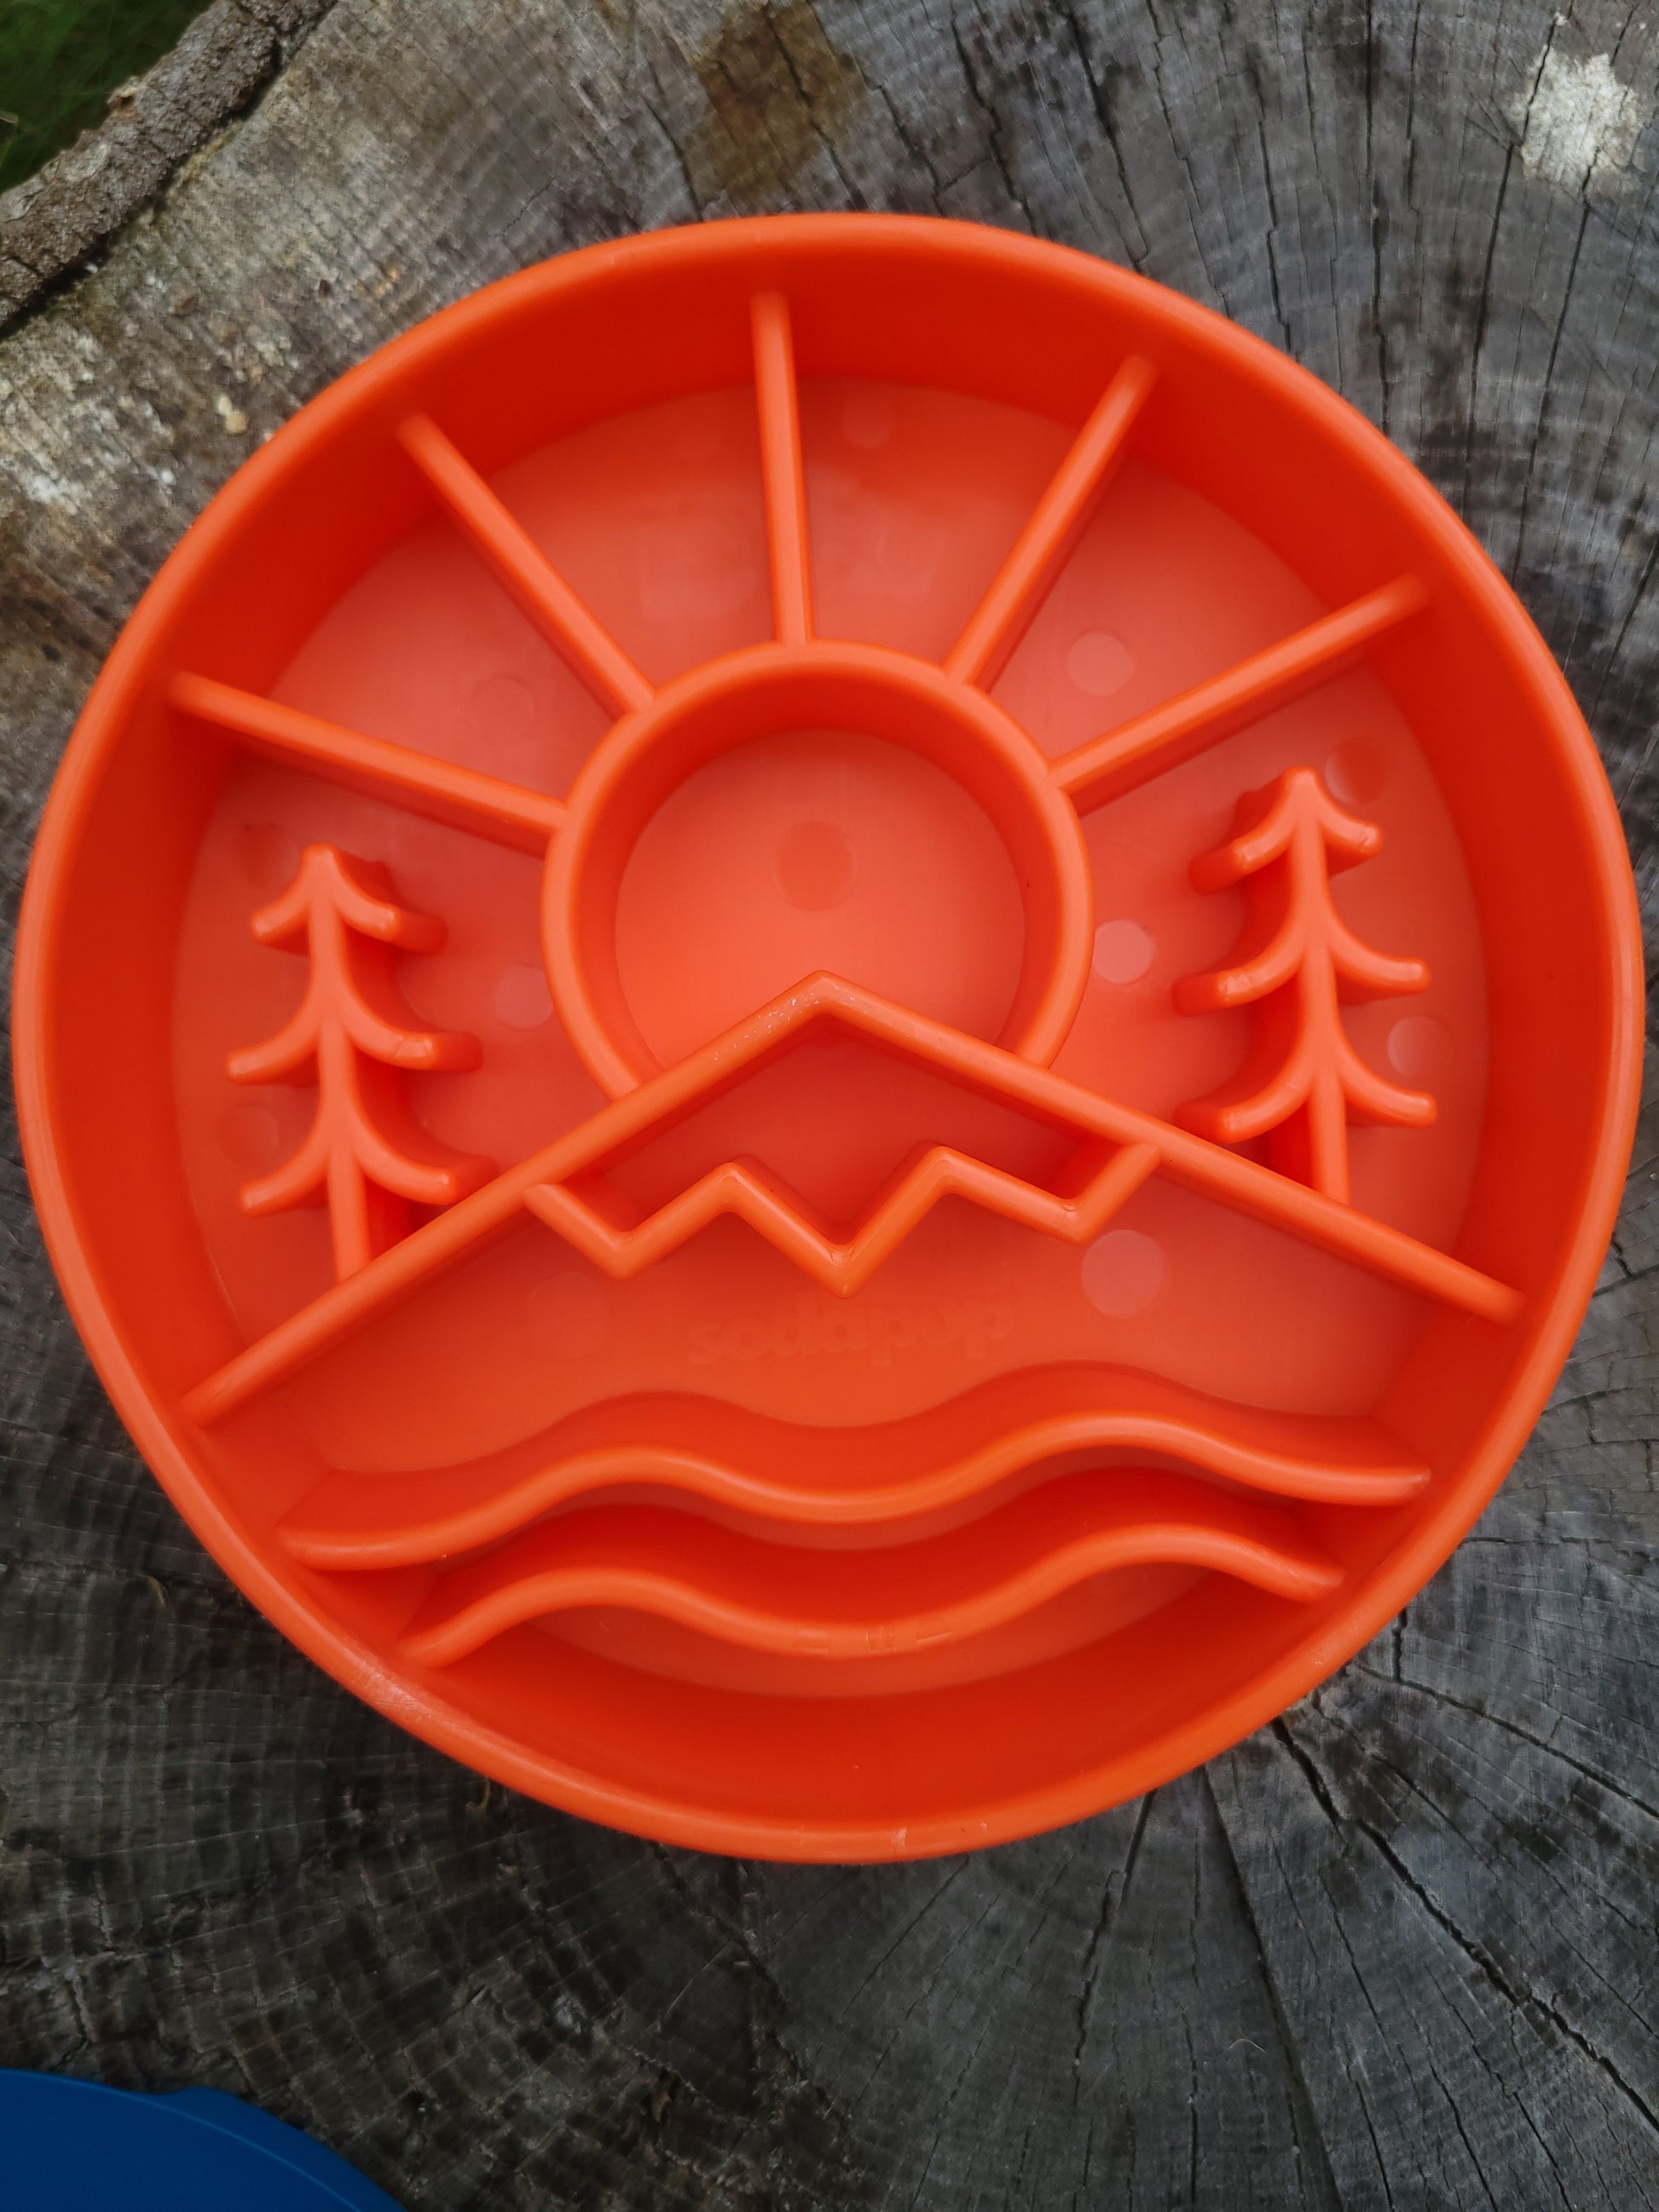 SodaPup Great Outdoors Slow Feeder Bowl - Green